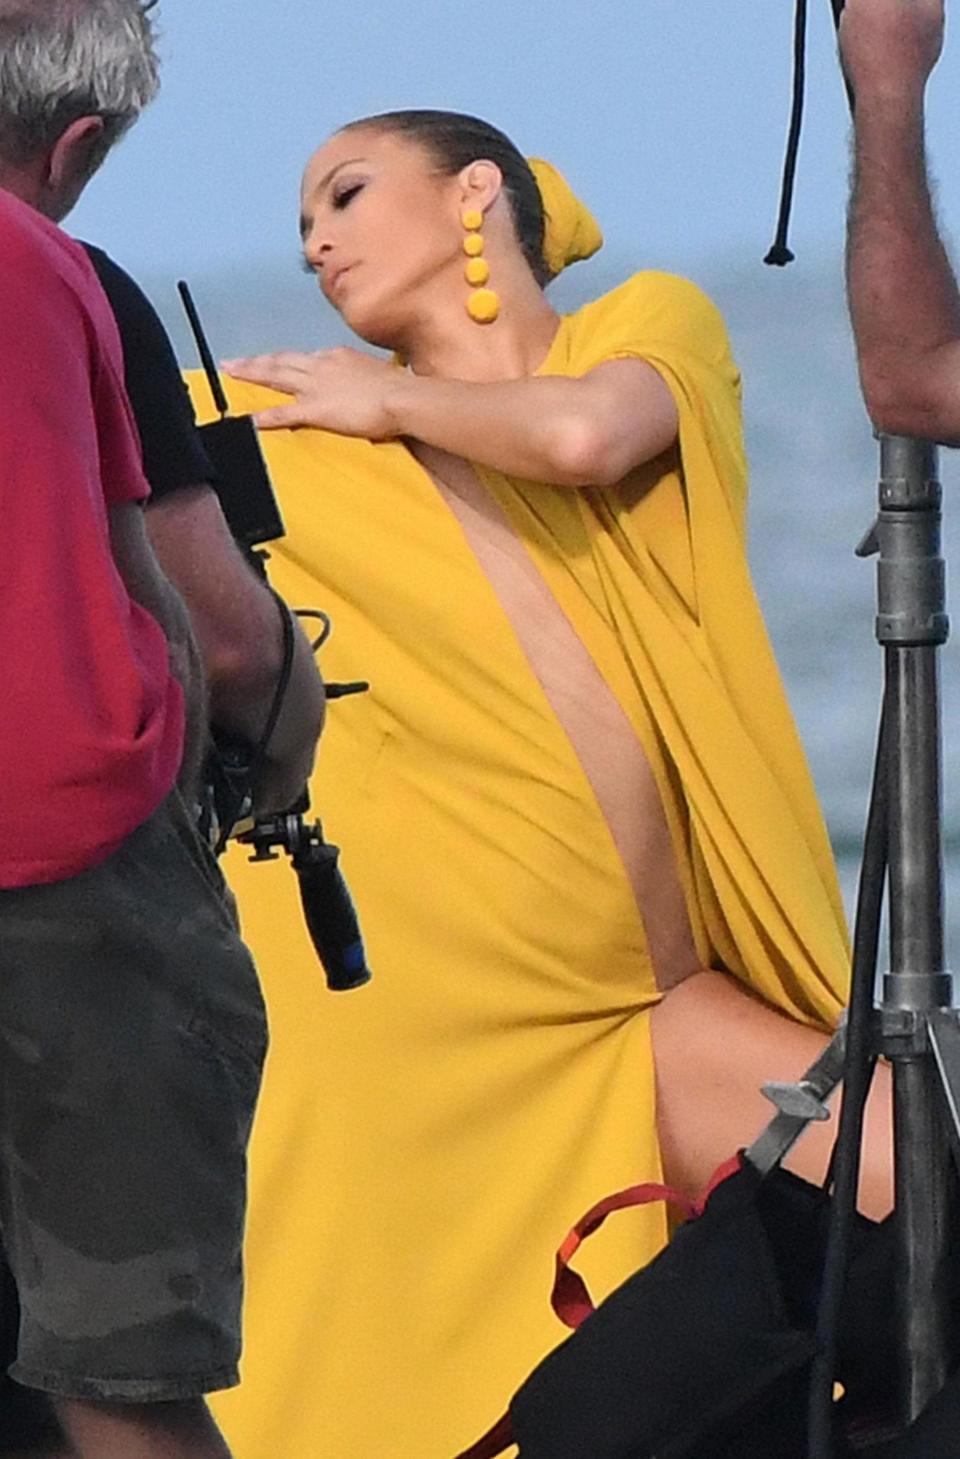 The 47-year-old musician left little to the imagination, wearing a semi-sheer yellow dress.